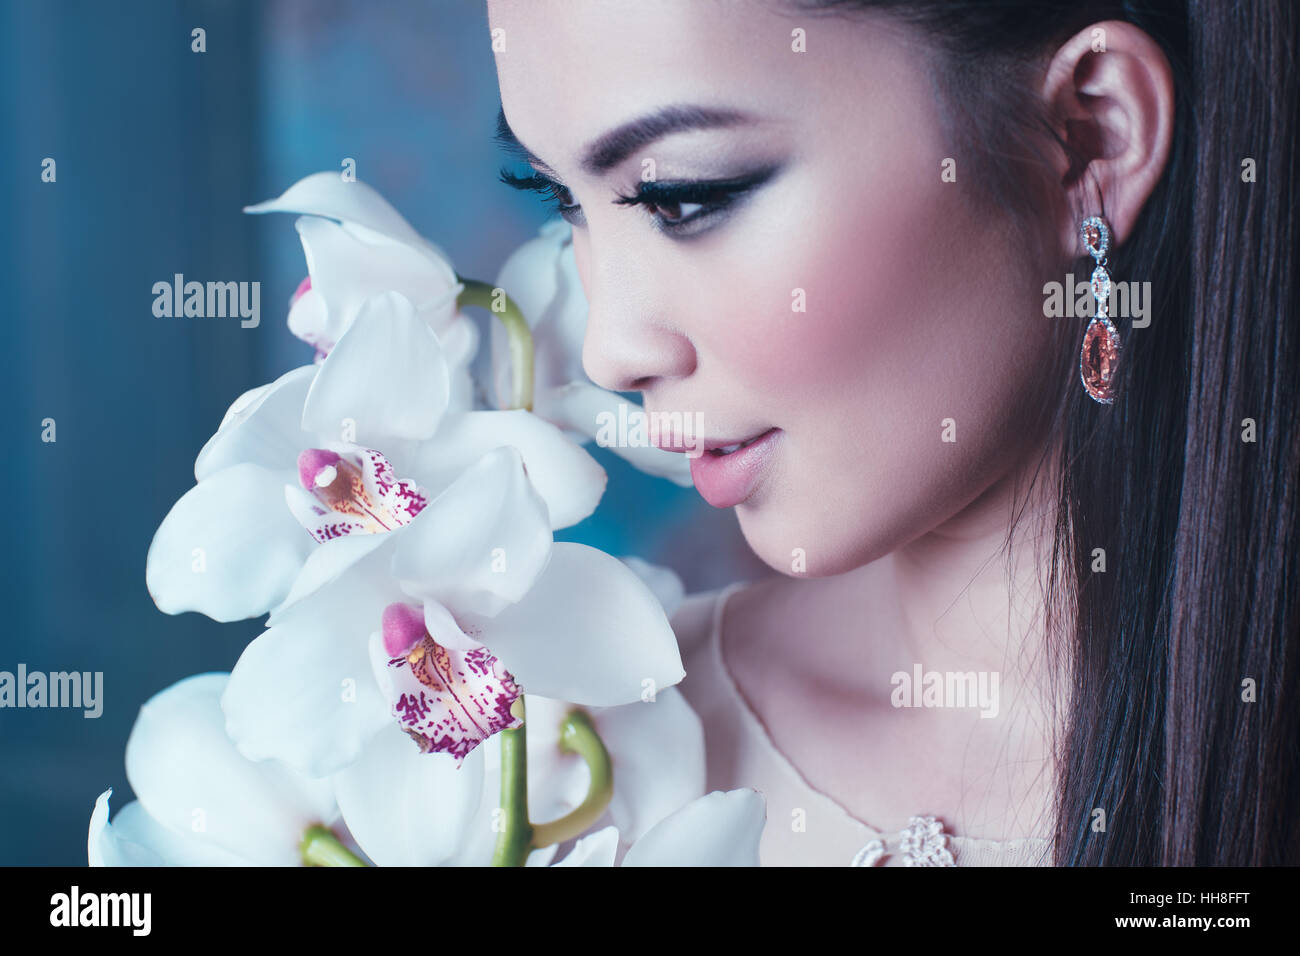 Young asian woman with orchid flower portrait close-up. Focus on lips. Stock Photo